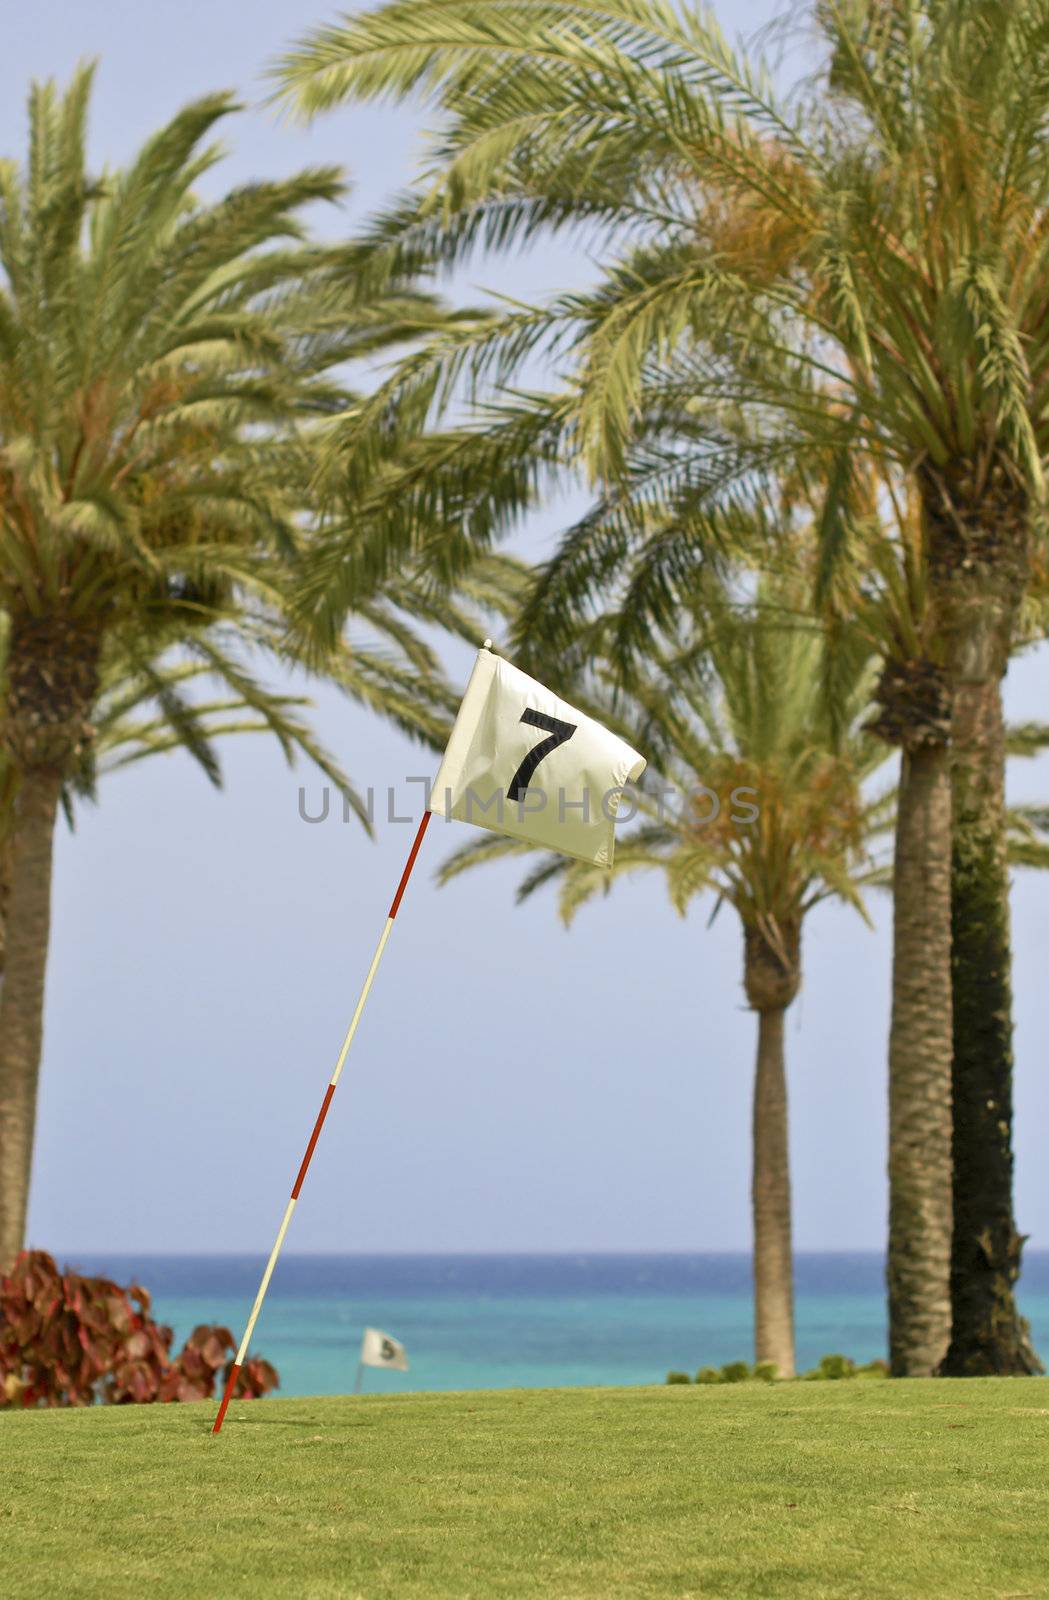 Golf course flag on the background of palms and sea